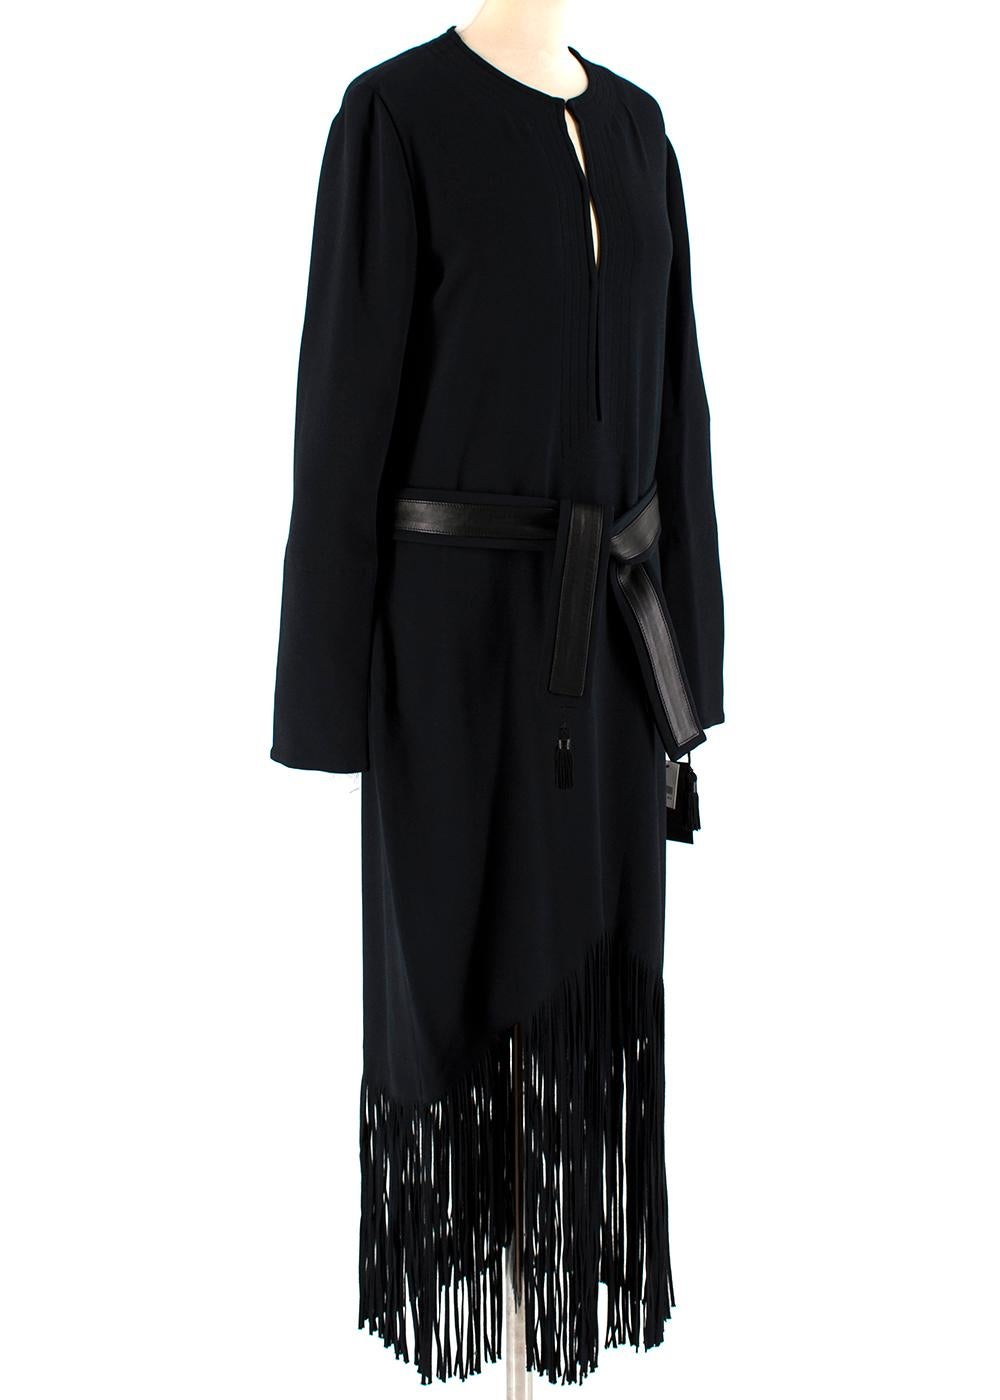 Tom Ford Black Long Fringed Dress with Leather Belt 

- Black stretch-cady
- Concealed hook fastenings along front, hook and zip fastening at back
- Loose fit, however use the tie belt to cinch in at the waist
- Mid-weight stretchy fabric
- Fringing